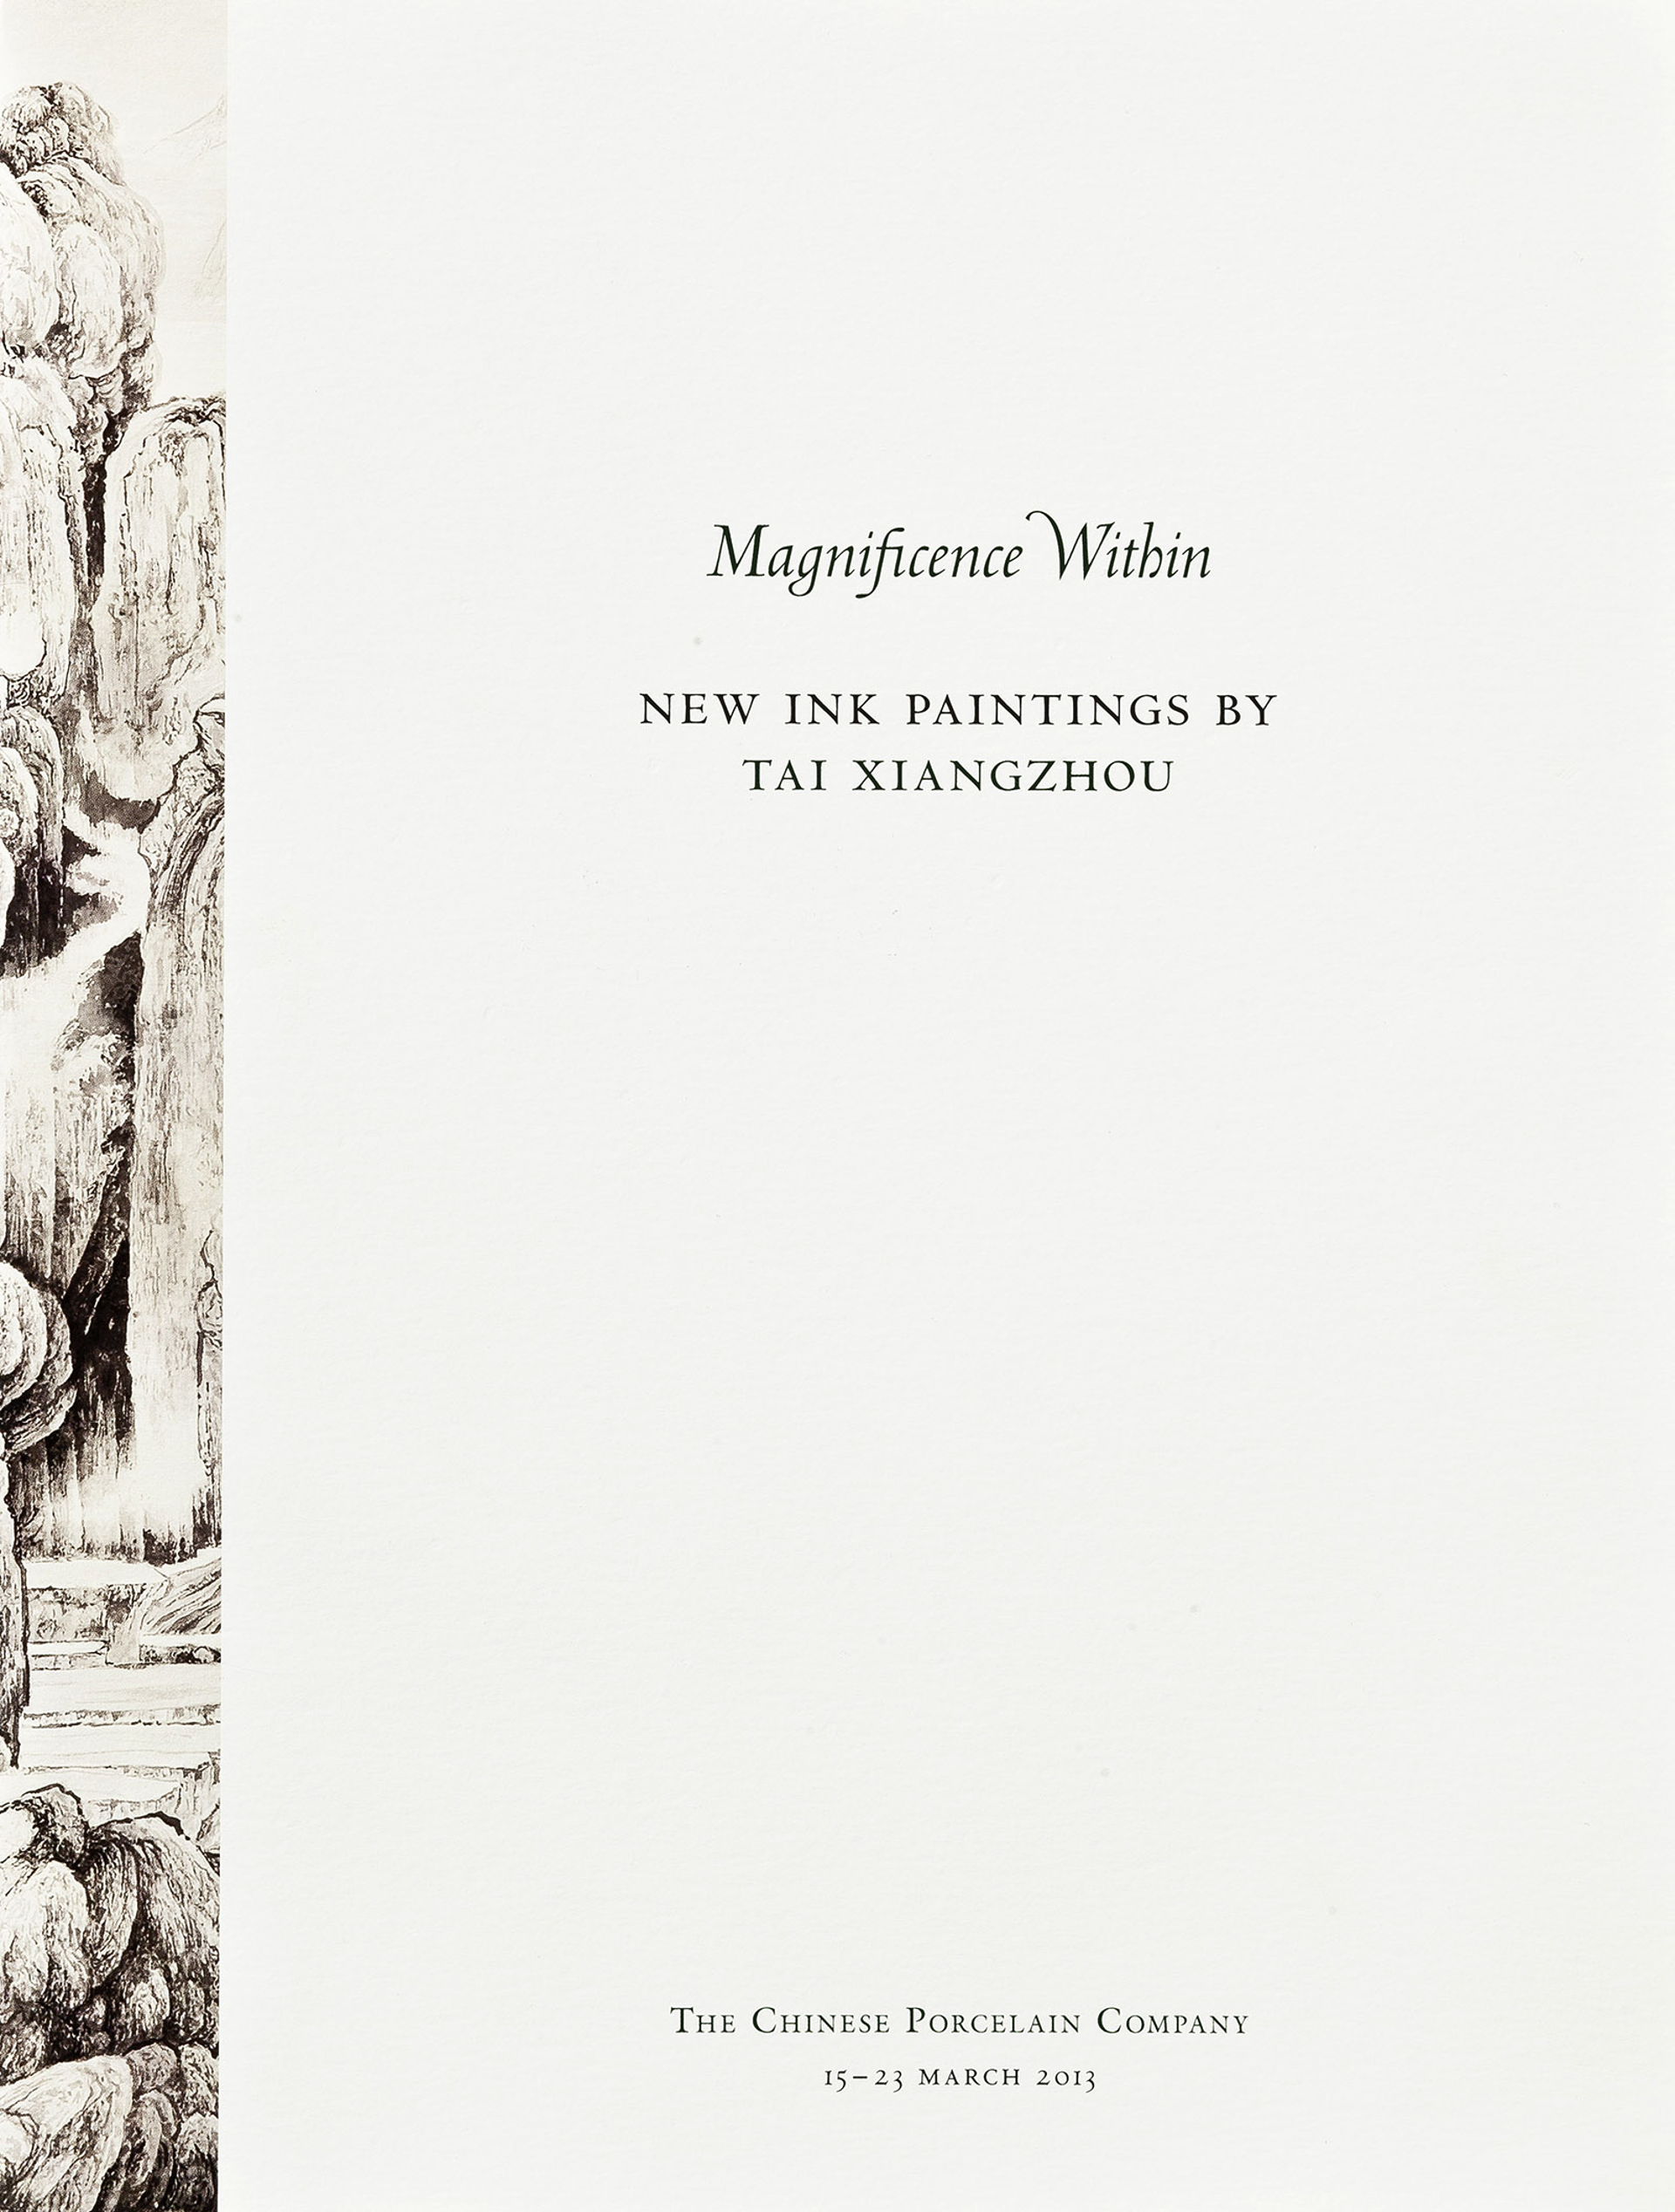 Magnificence Within, New Ink Paintings by Tai Xiangzhou (out of print) by Brochure 16